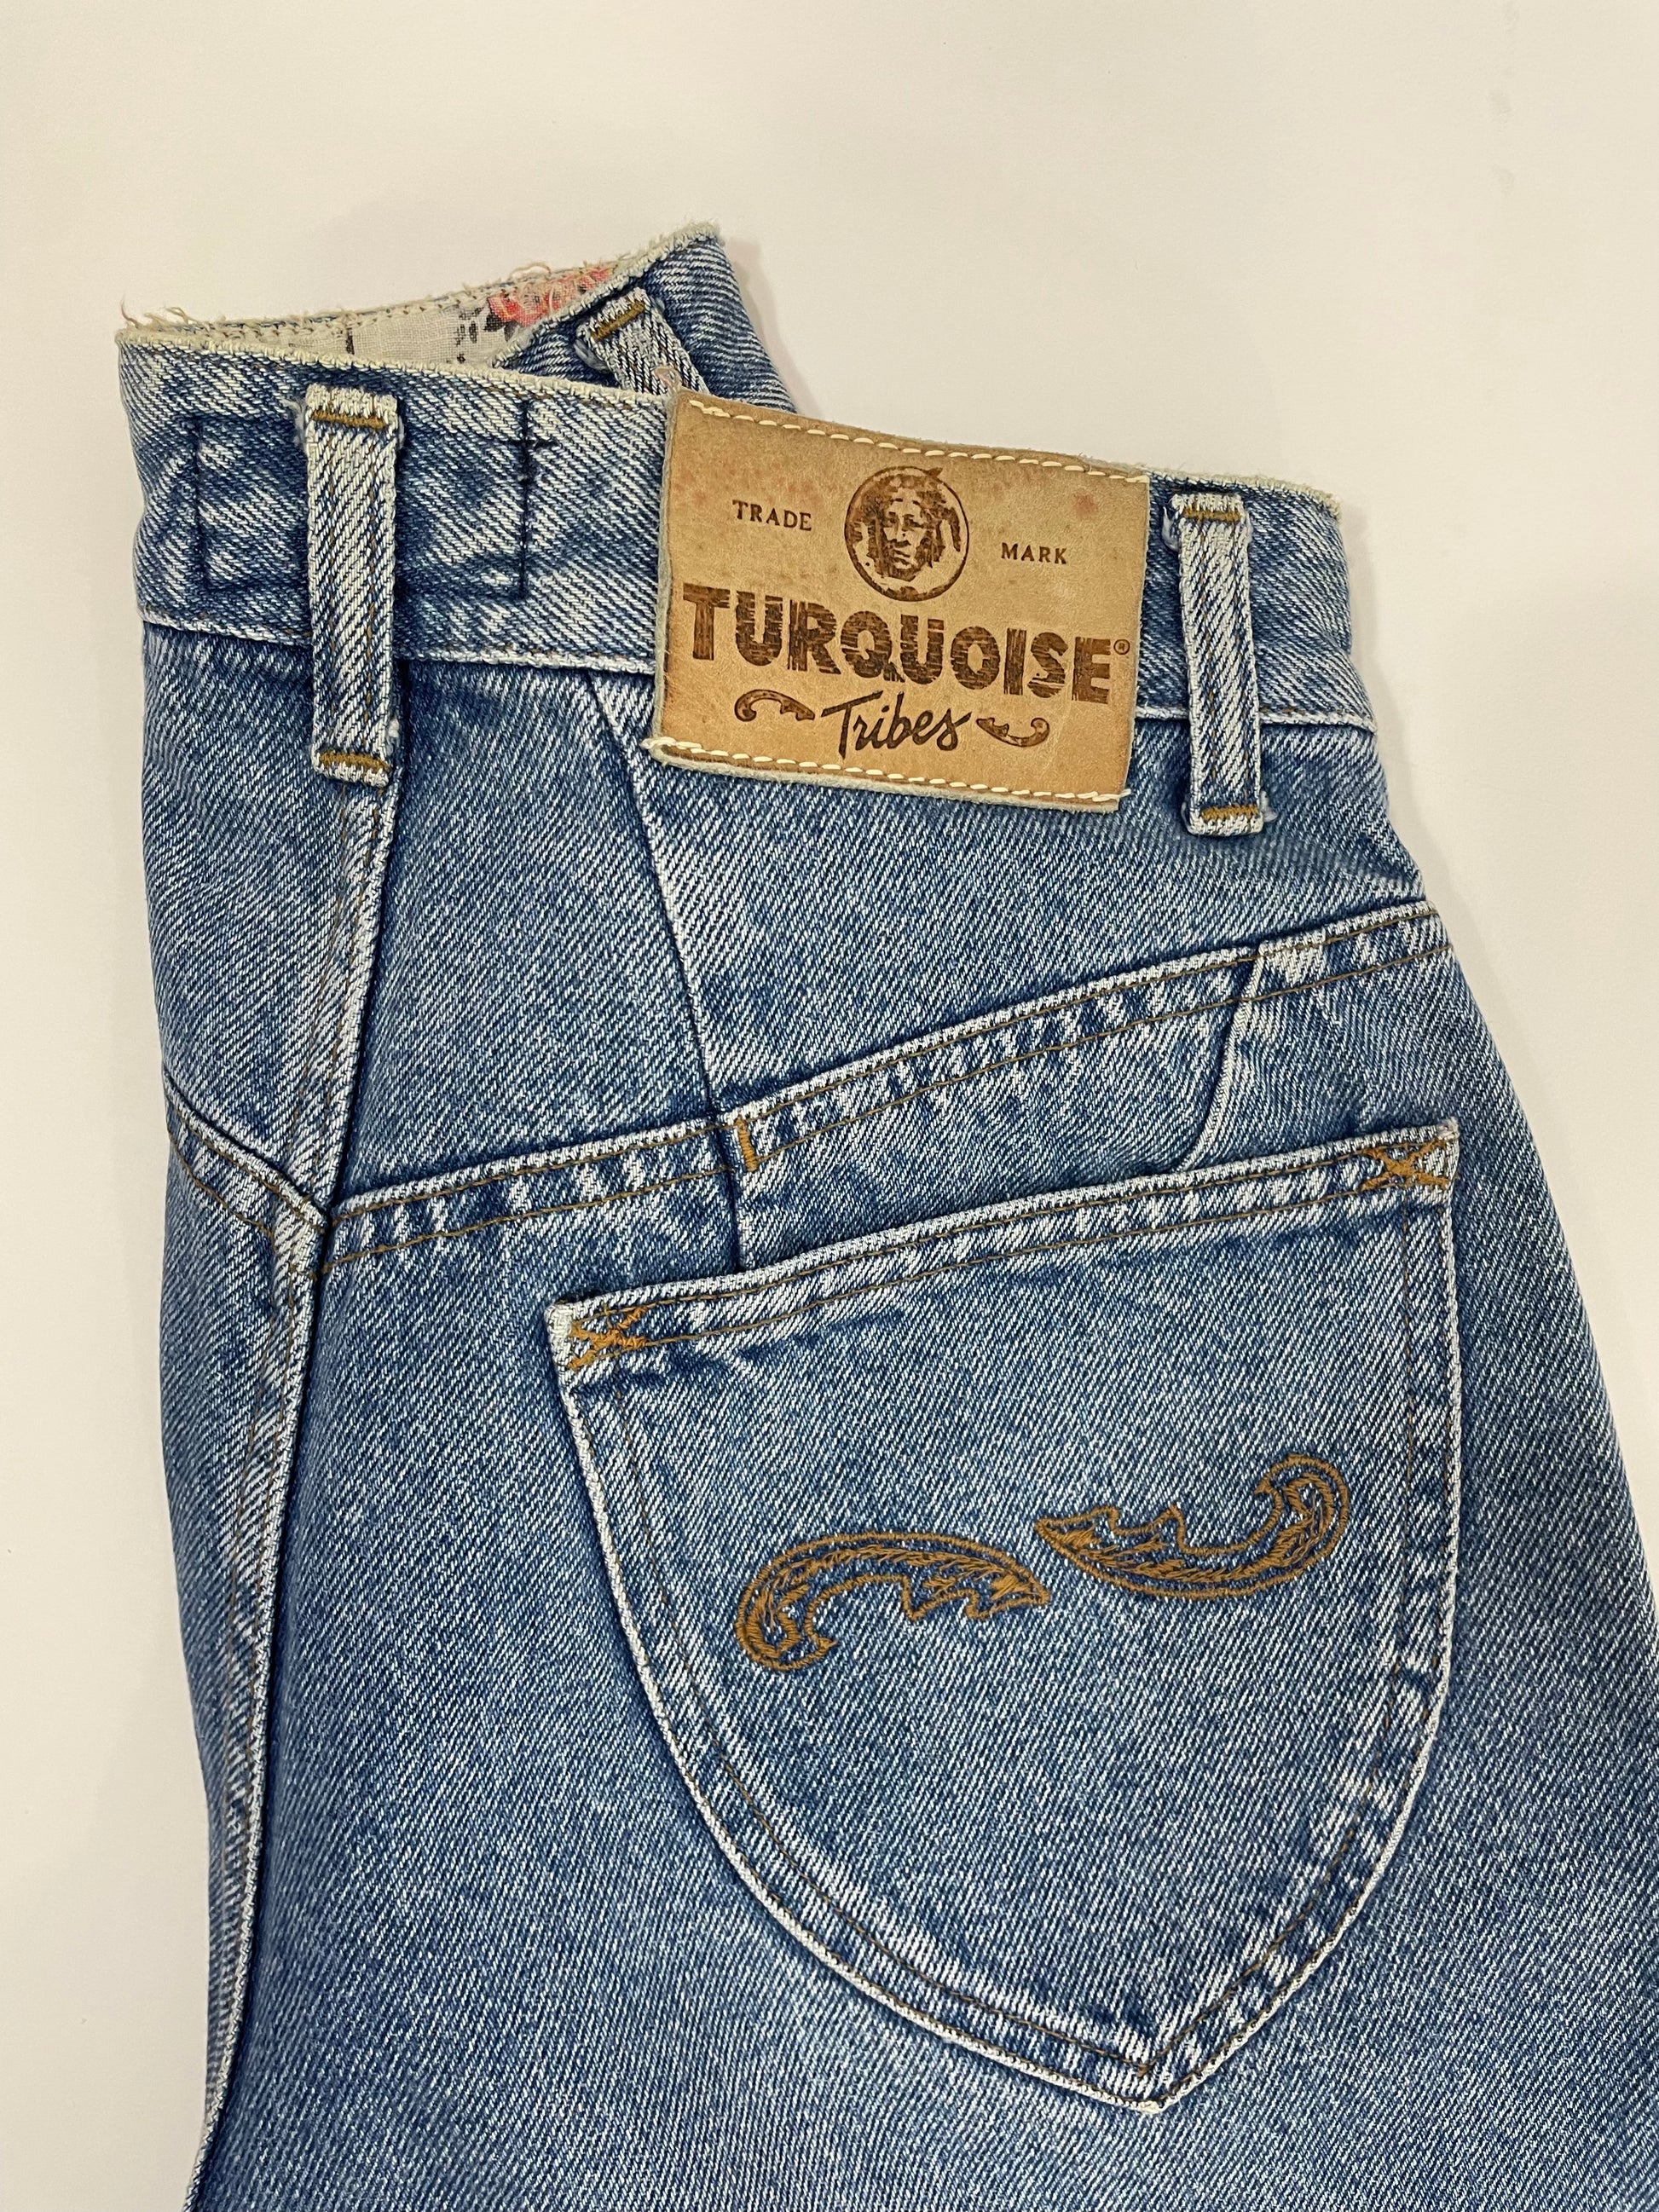 jeans-turquoise-anni-70-donna